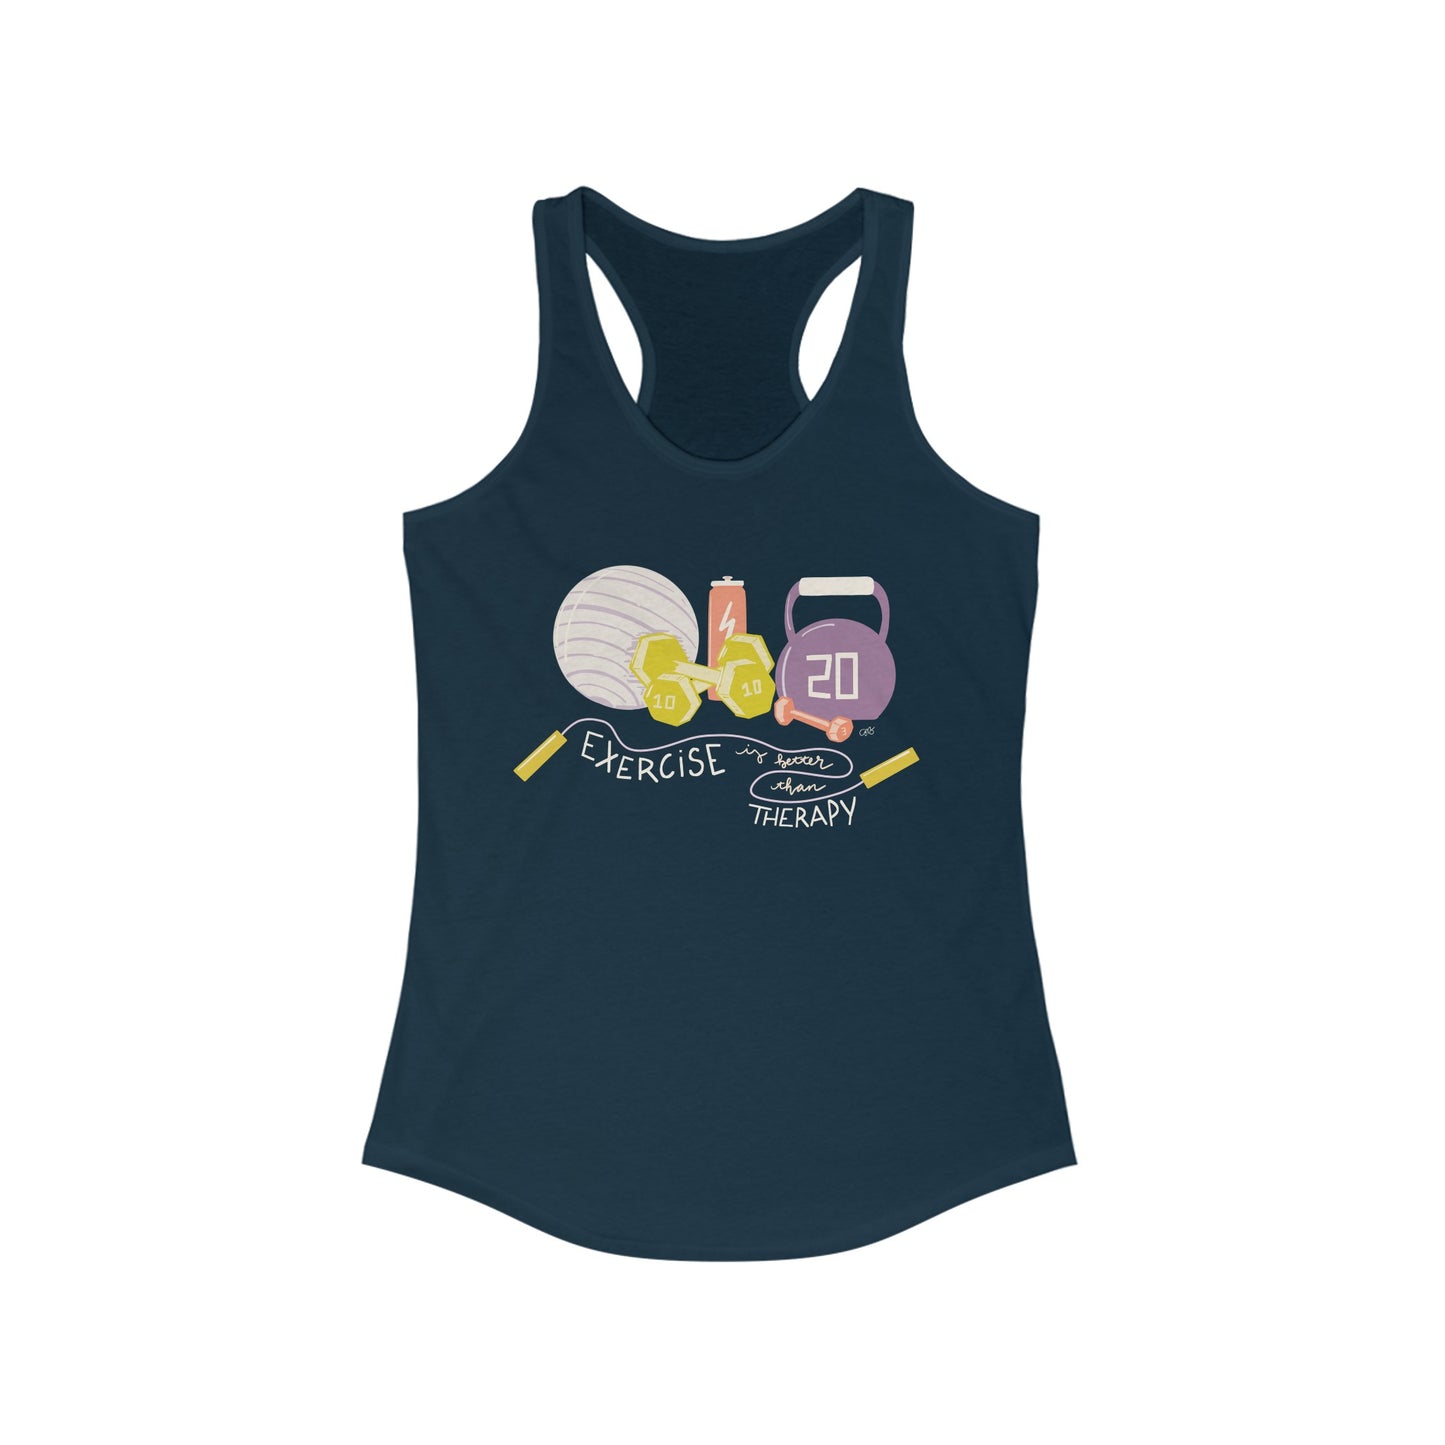 Exercise over Therapy Racerback Tank